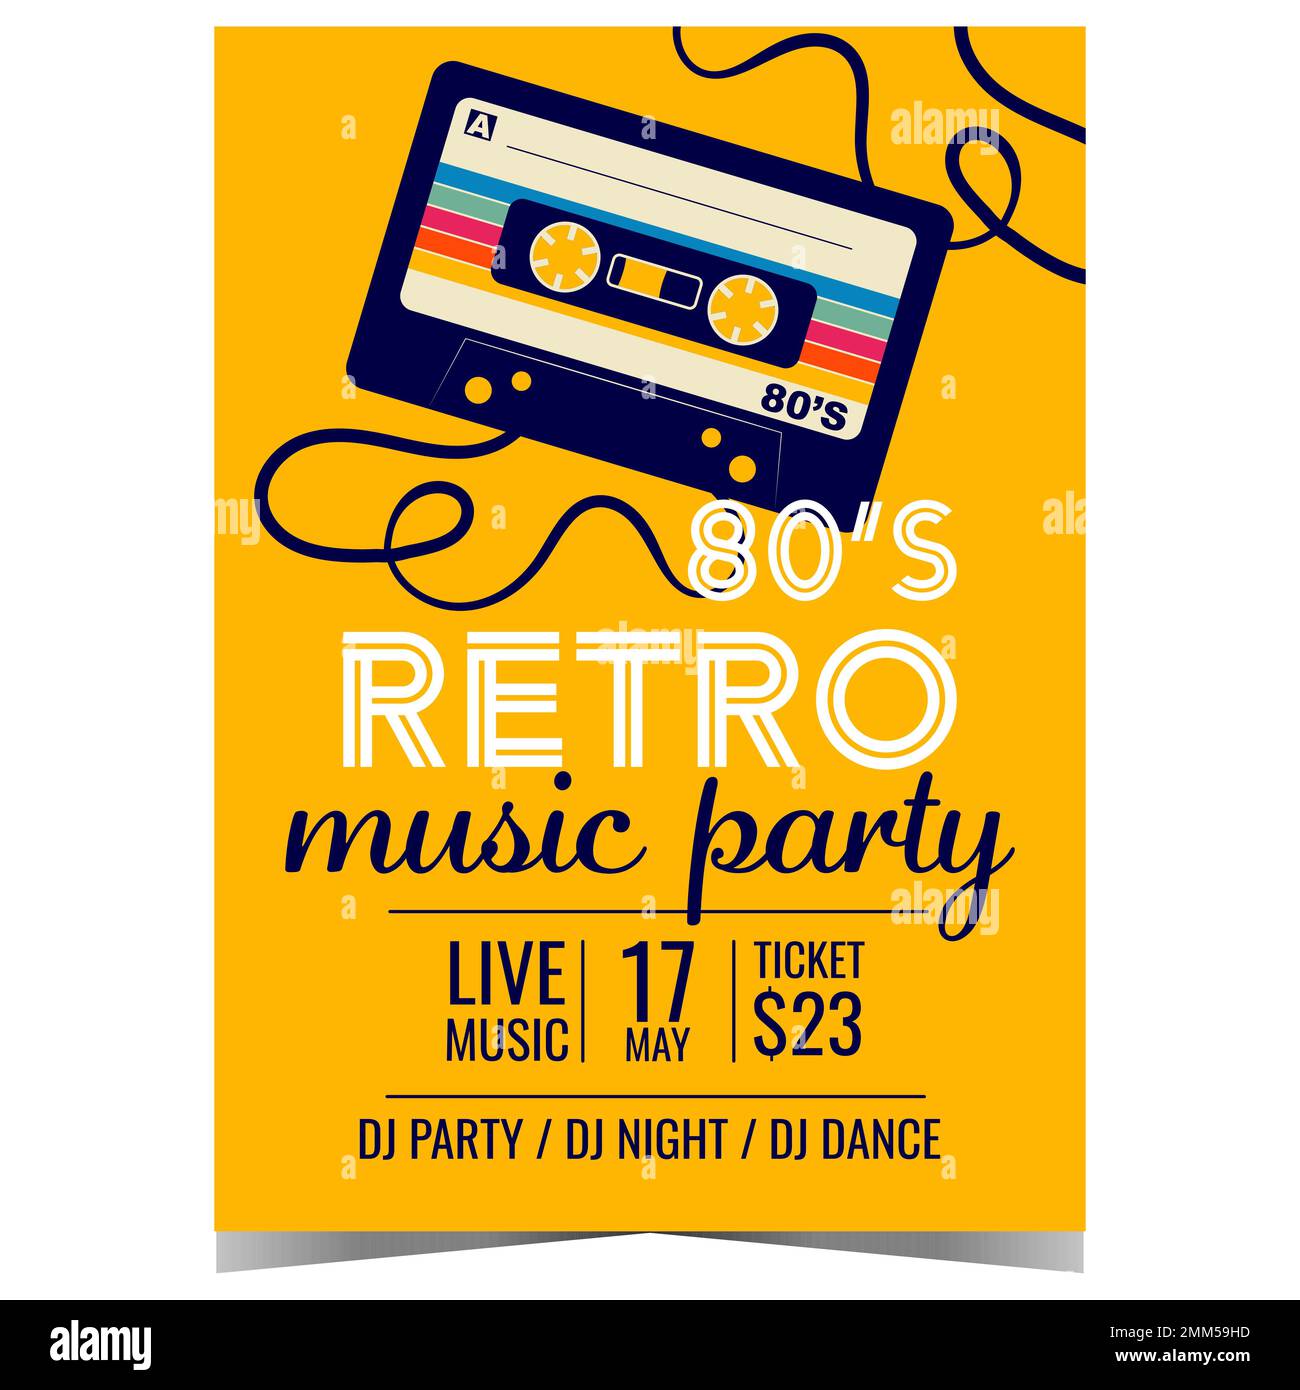 60s 70s Retro Music Party Flyer Stock Vector (Royalty Free